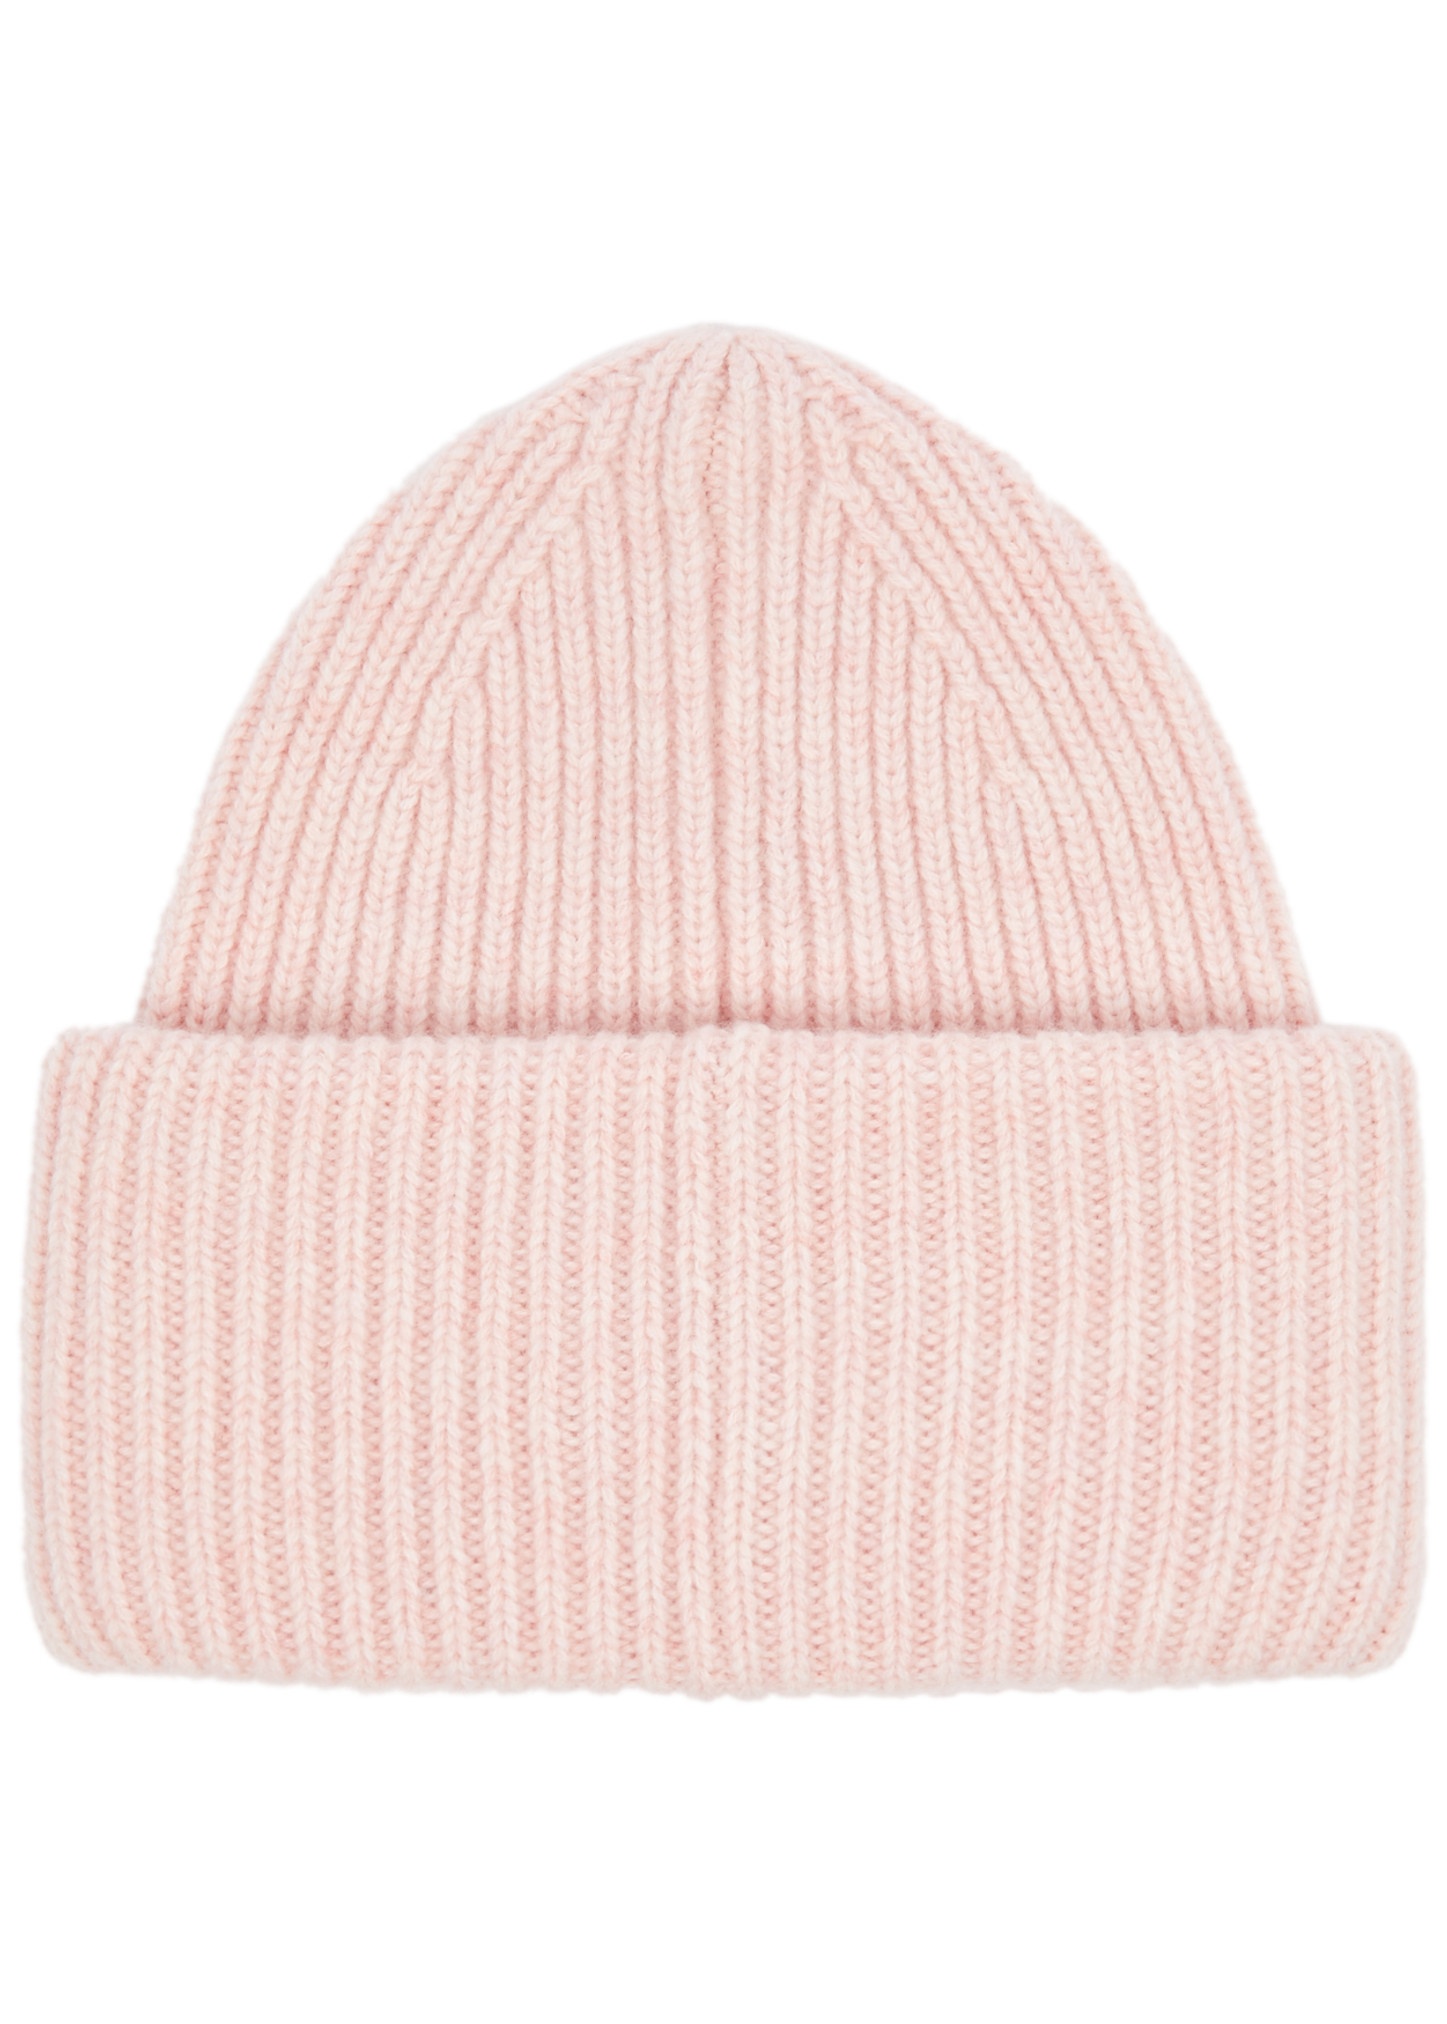 Pansy ribbed wool beanie - 2